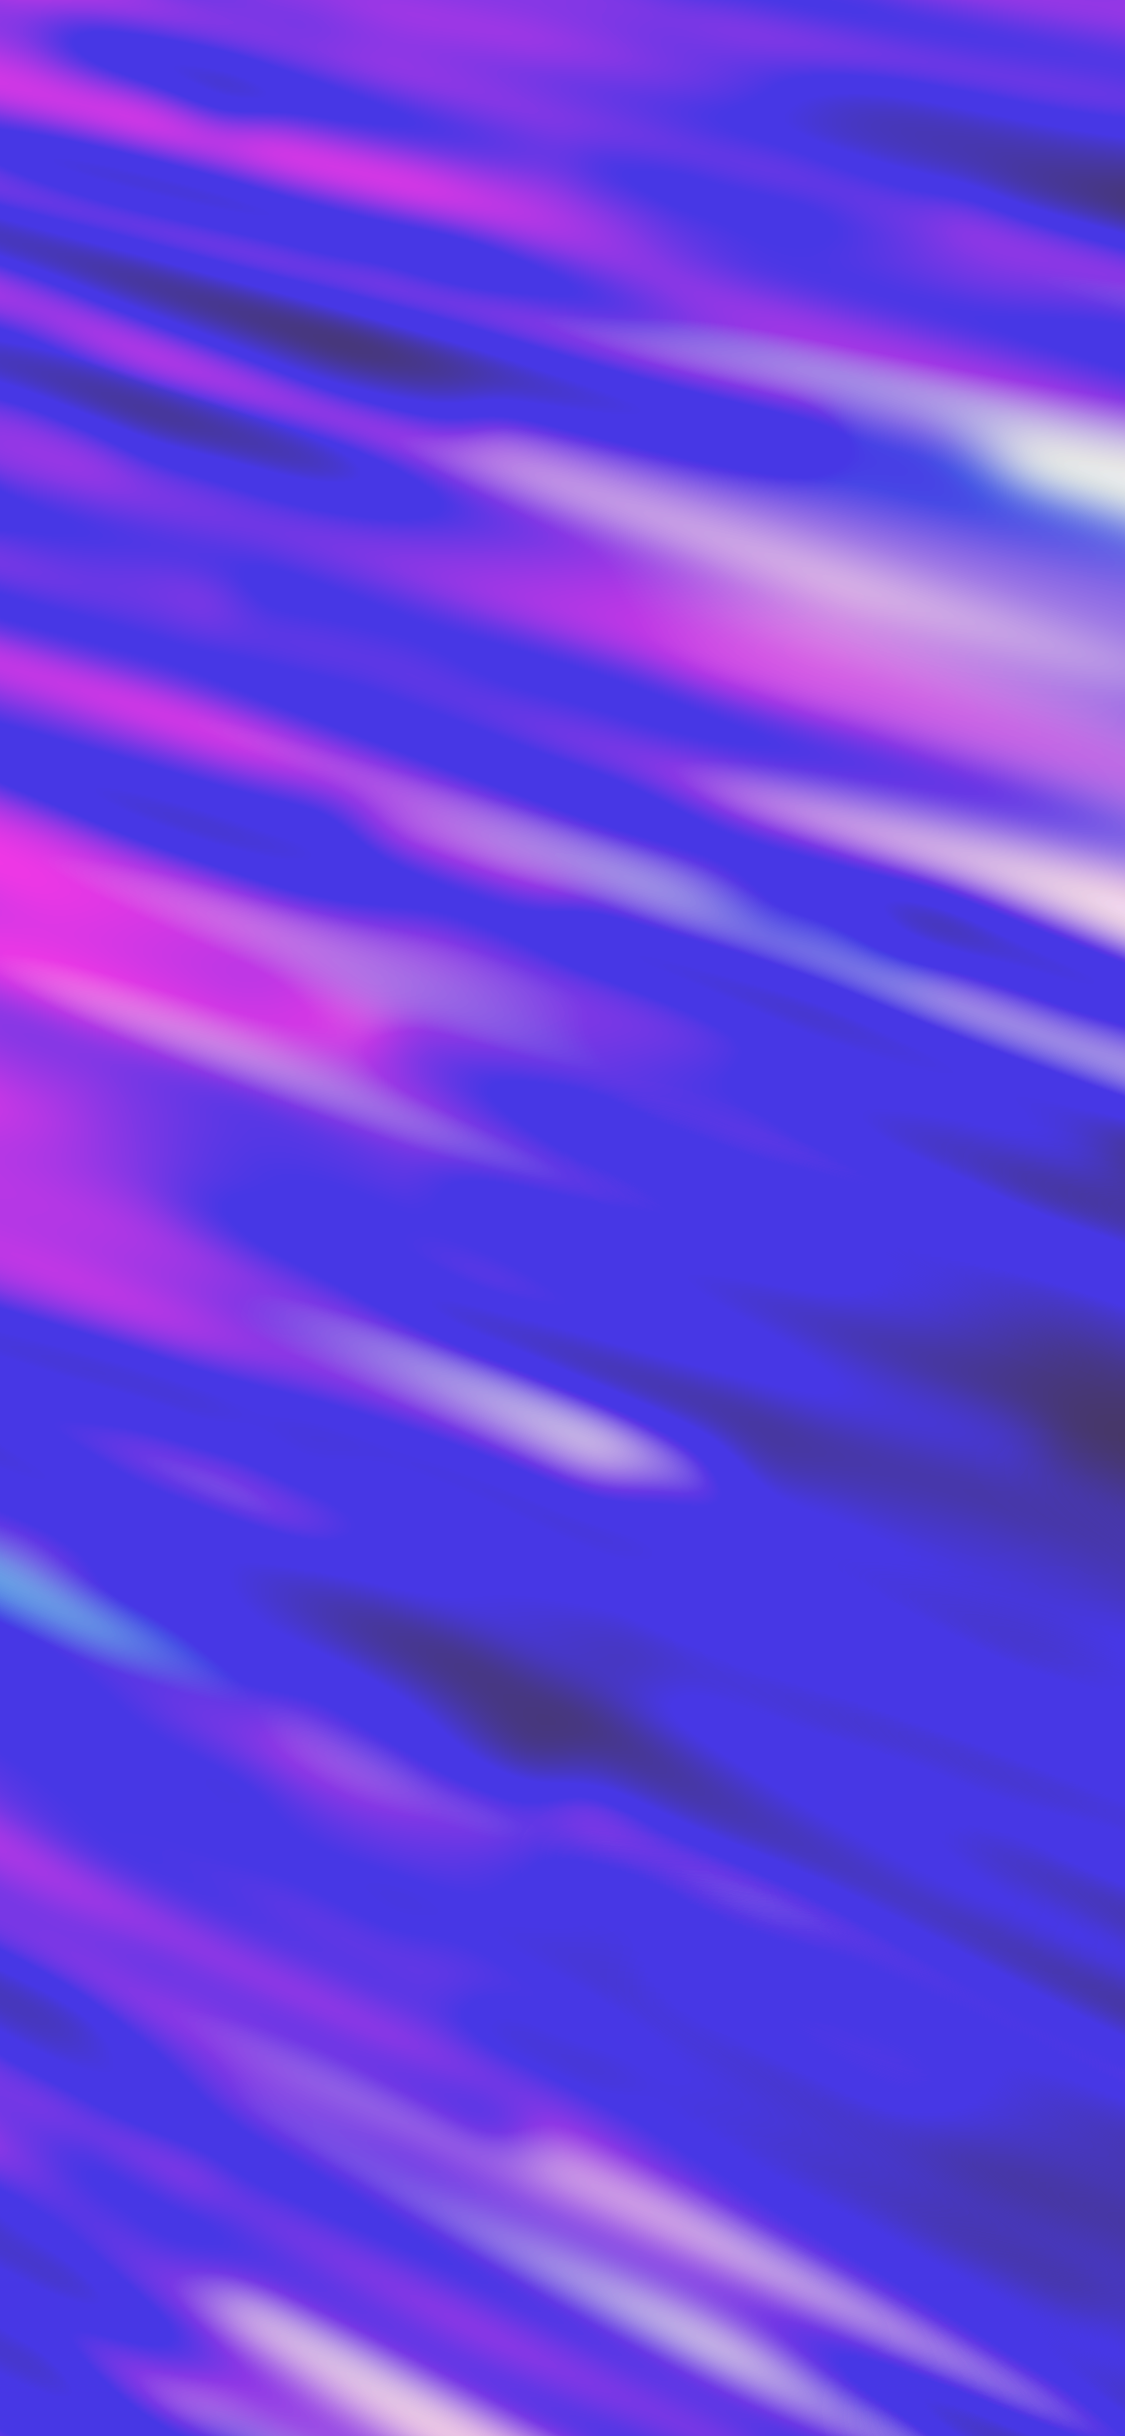 I made a few blue and purple gradient wallpaper link in comments